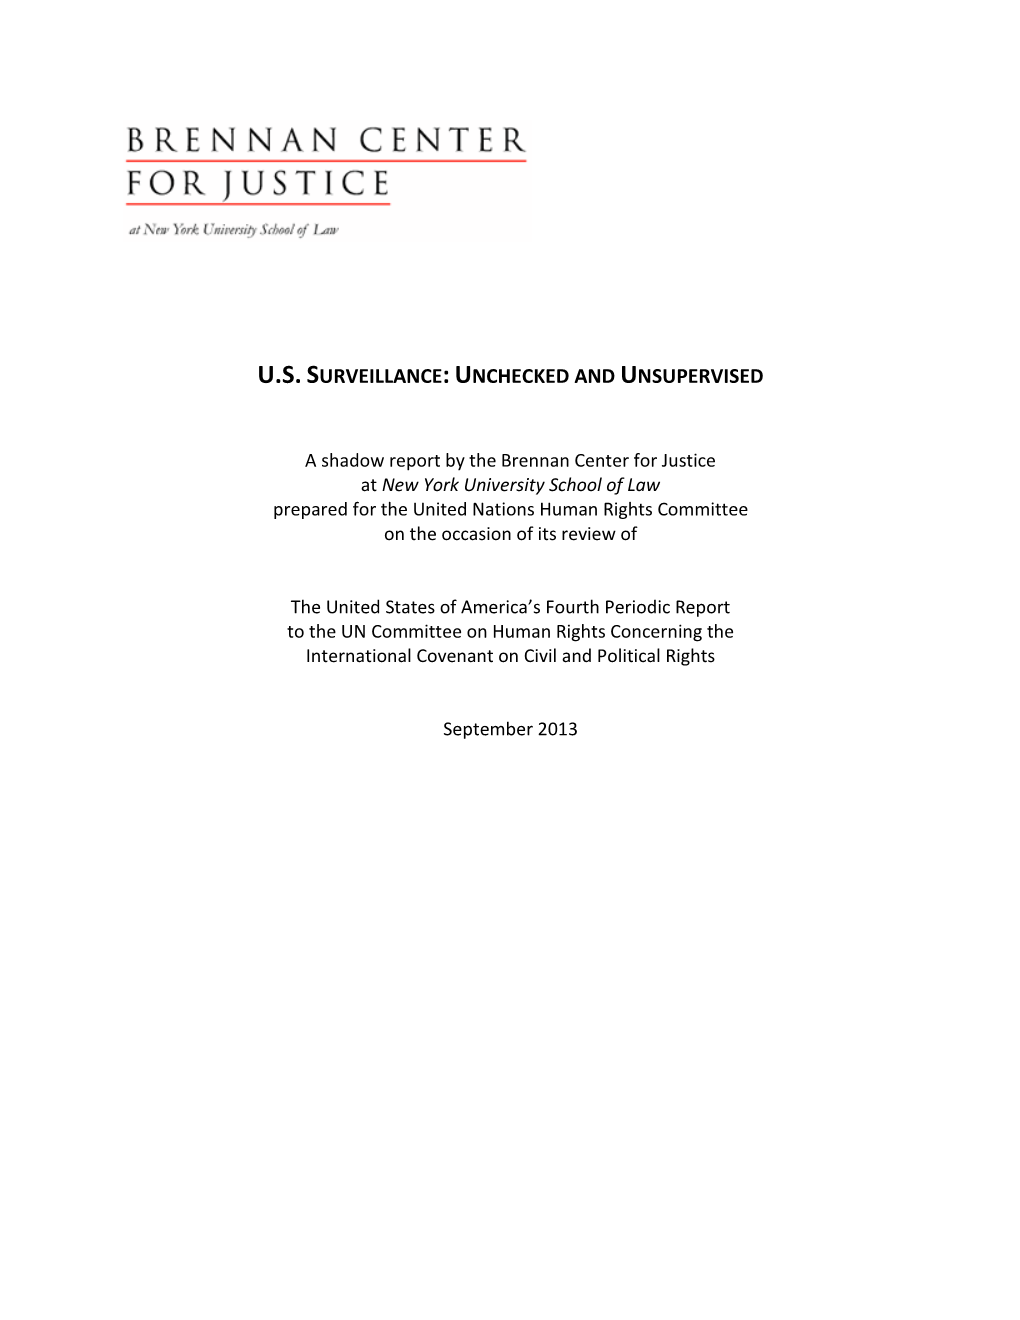 U.S. Surveillance: Unchecked and Unsupervised